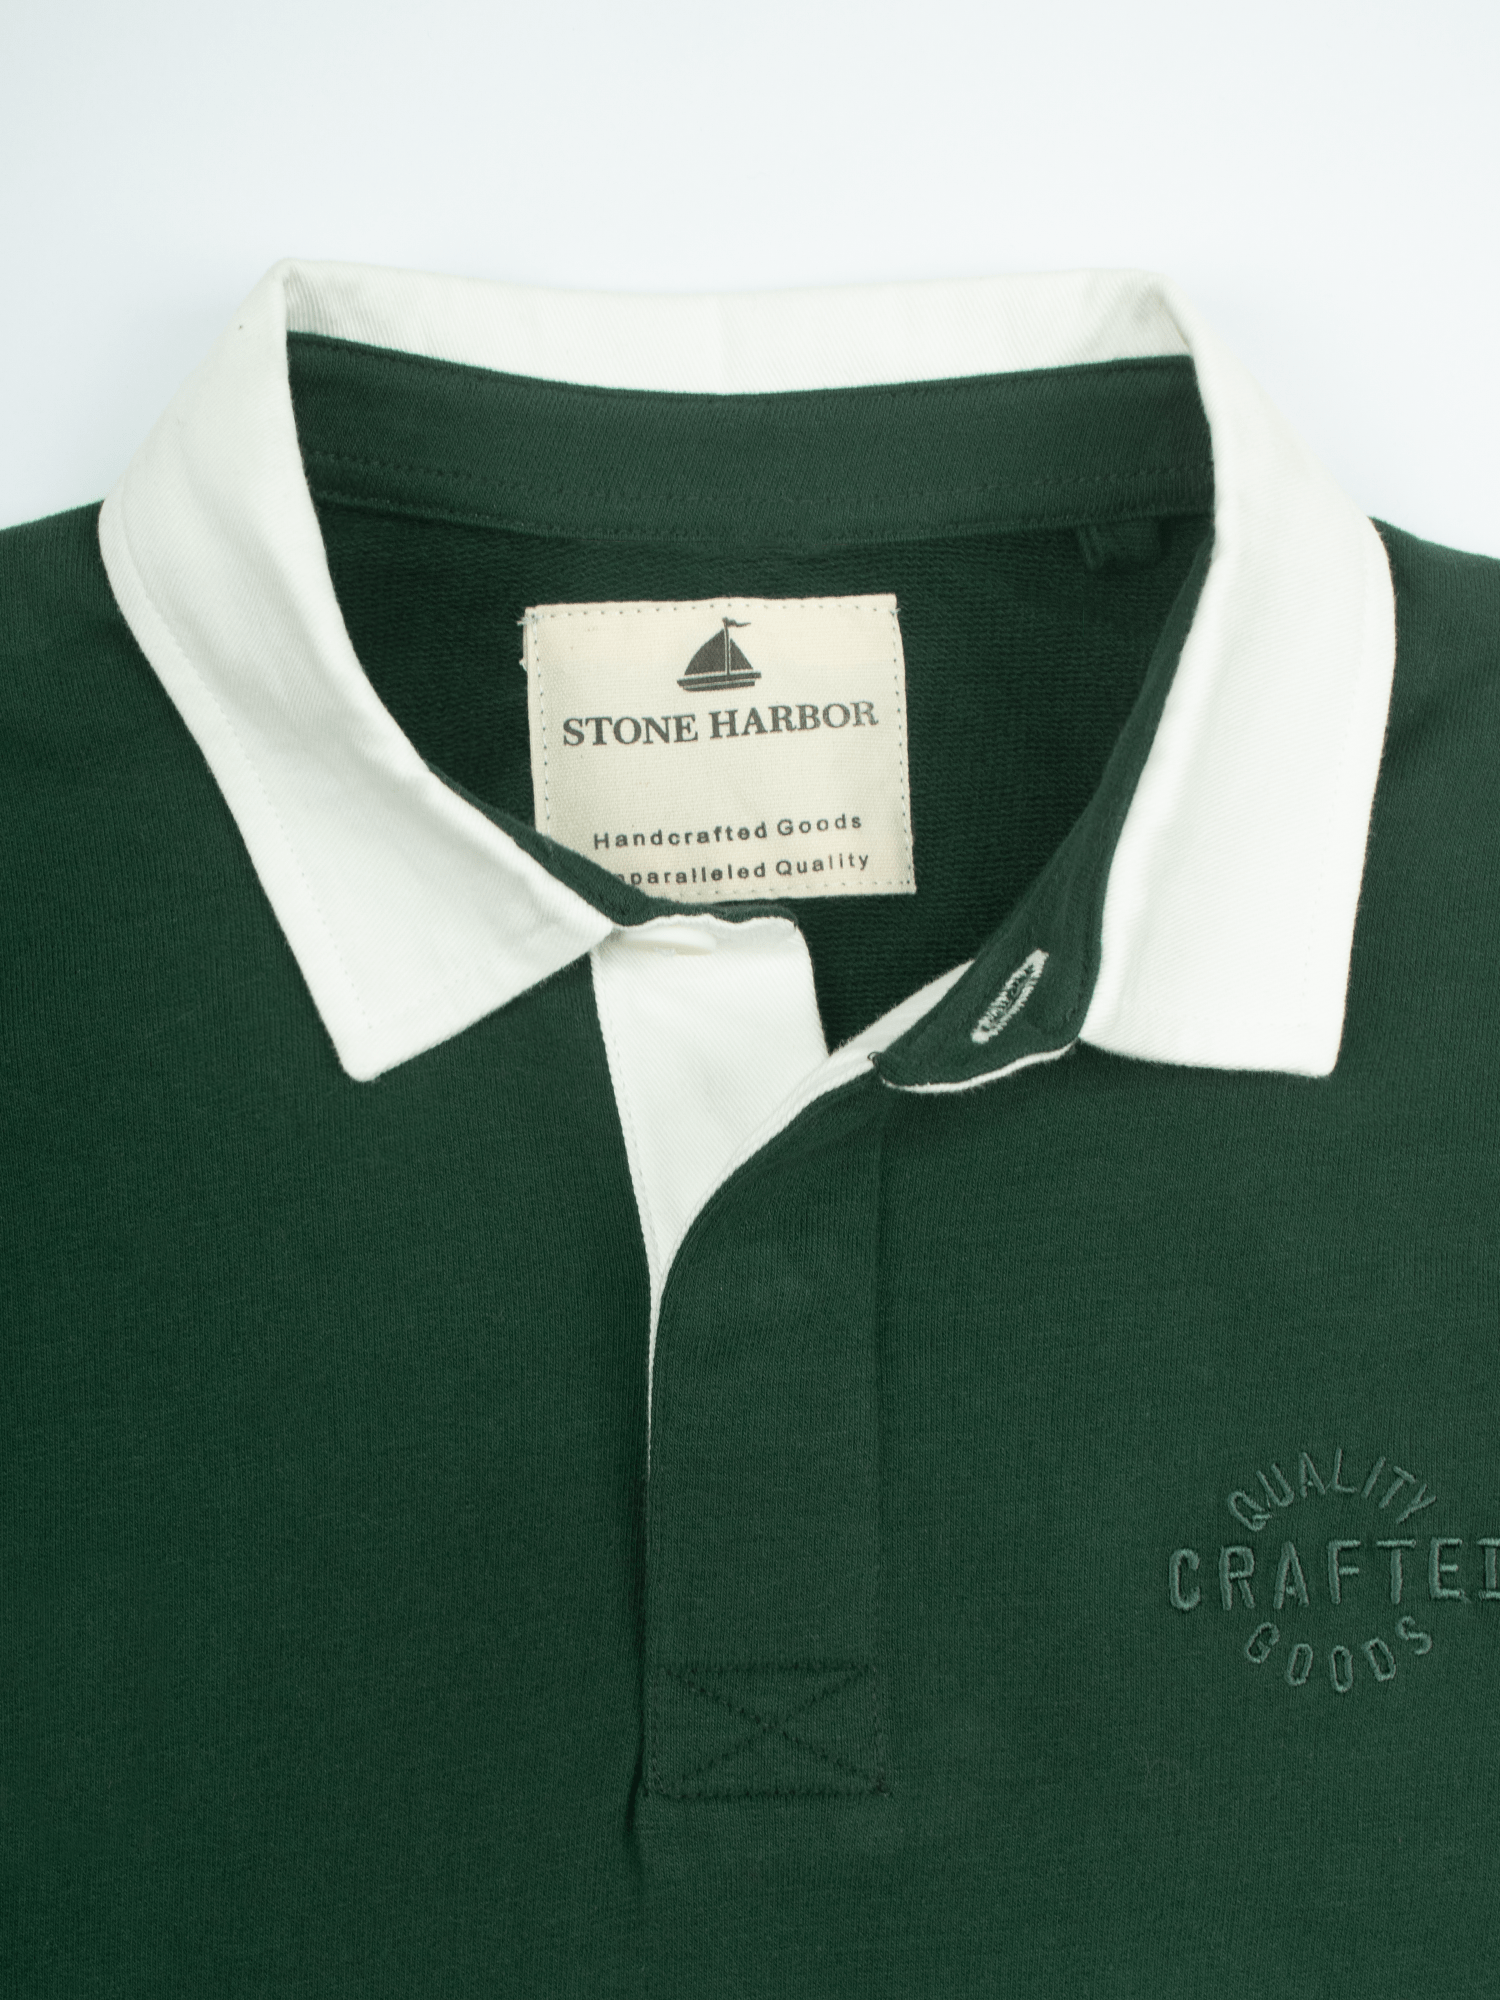 Stone Harbor MEN'S UNIQUE CRAFTED RUGBY